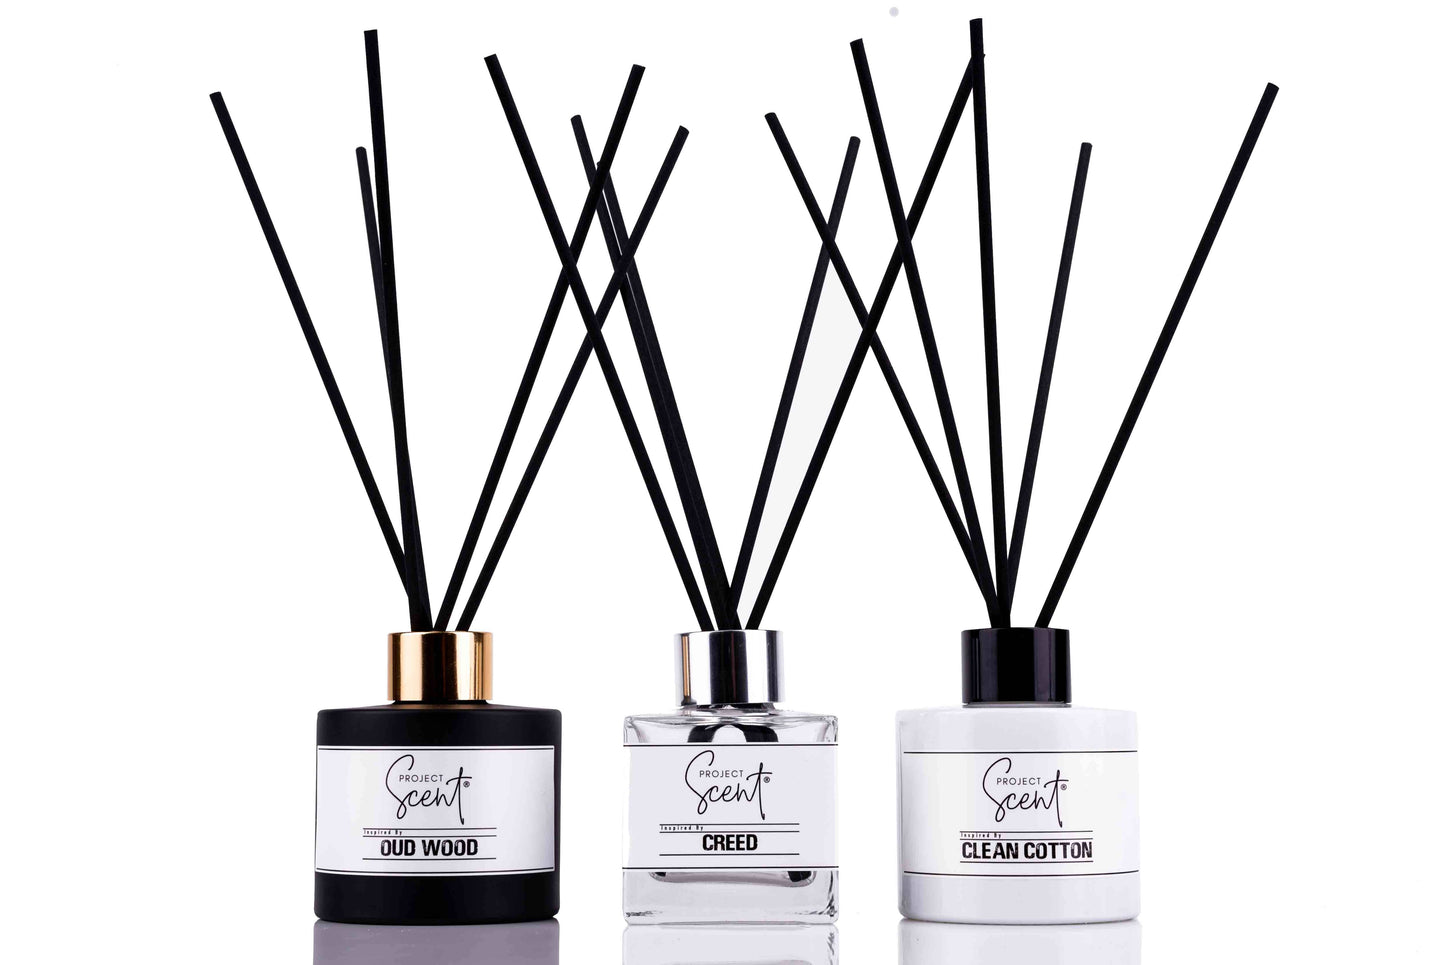 Creed Inspired Reed Diffuser 100ml